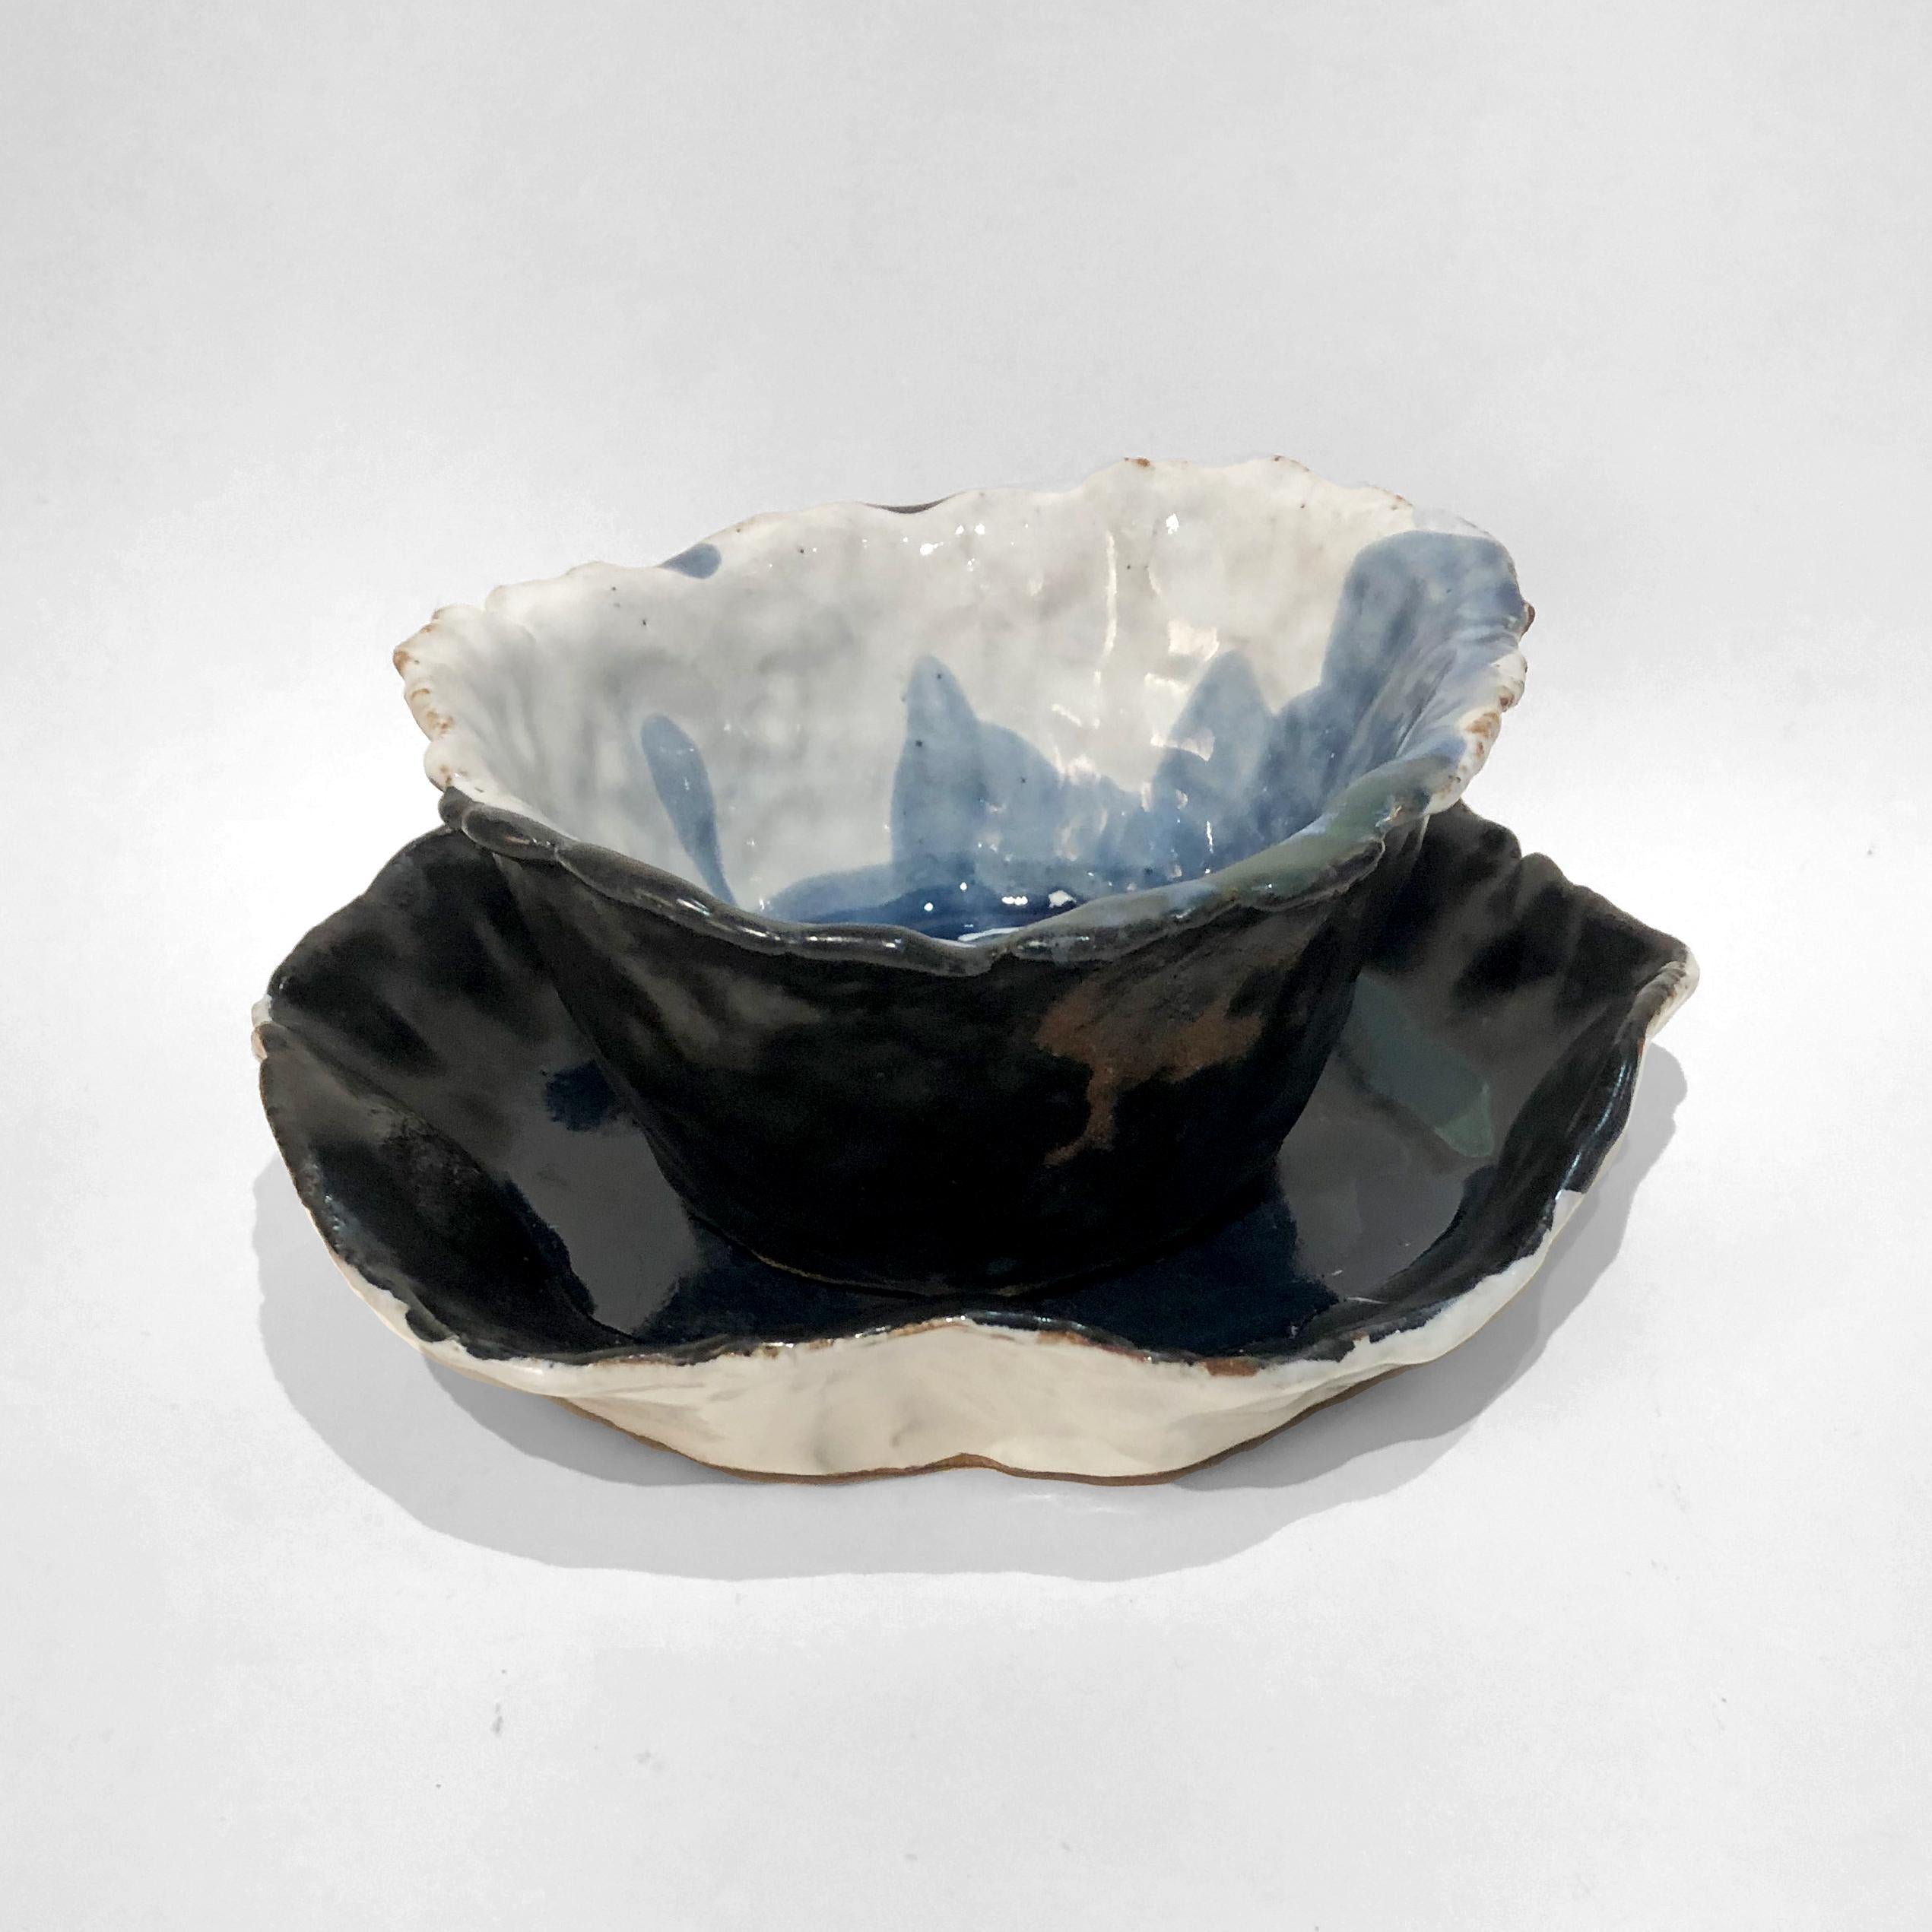 Hannelore’s creations are intended to be functional, yet deeply imbued with expressive content. In her ceramic vessels, she looks for relaxed forms that feel more gestural, soft and fluid even after they have been fired.

All her creations are